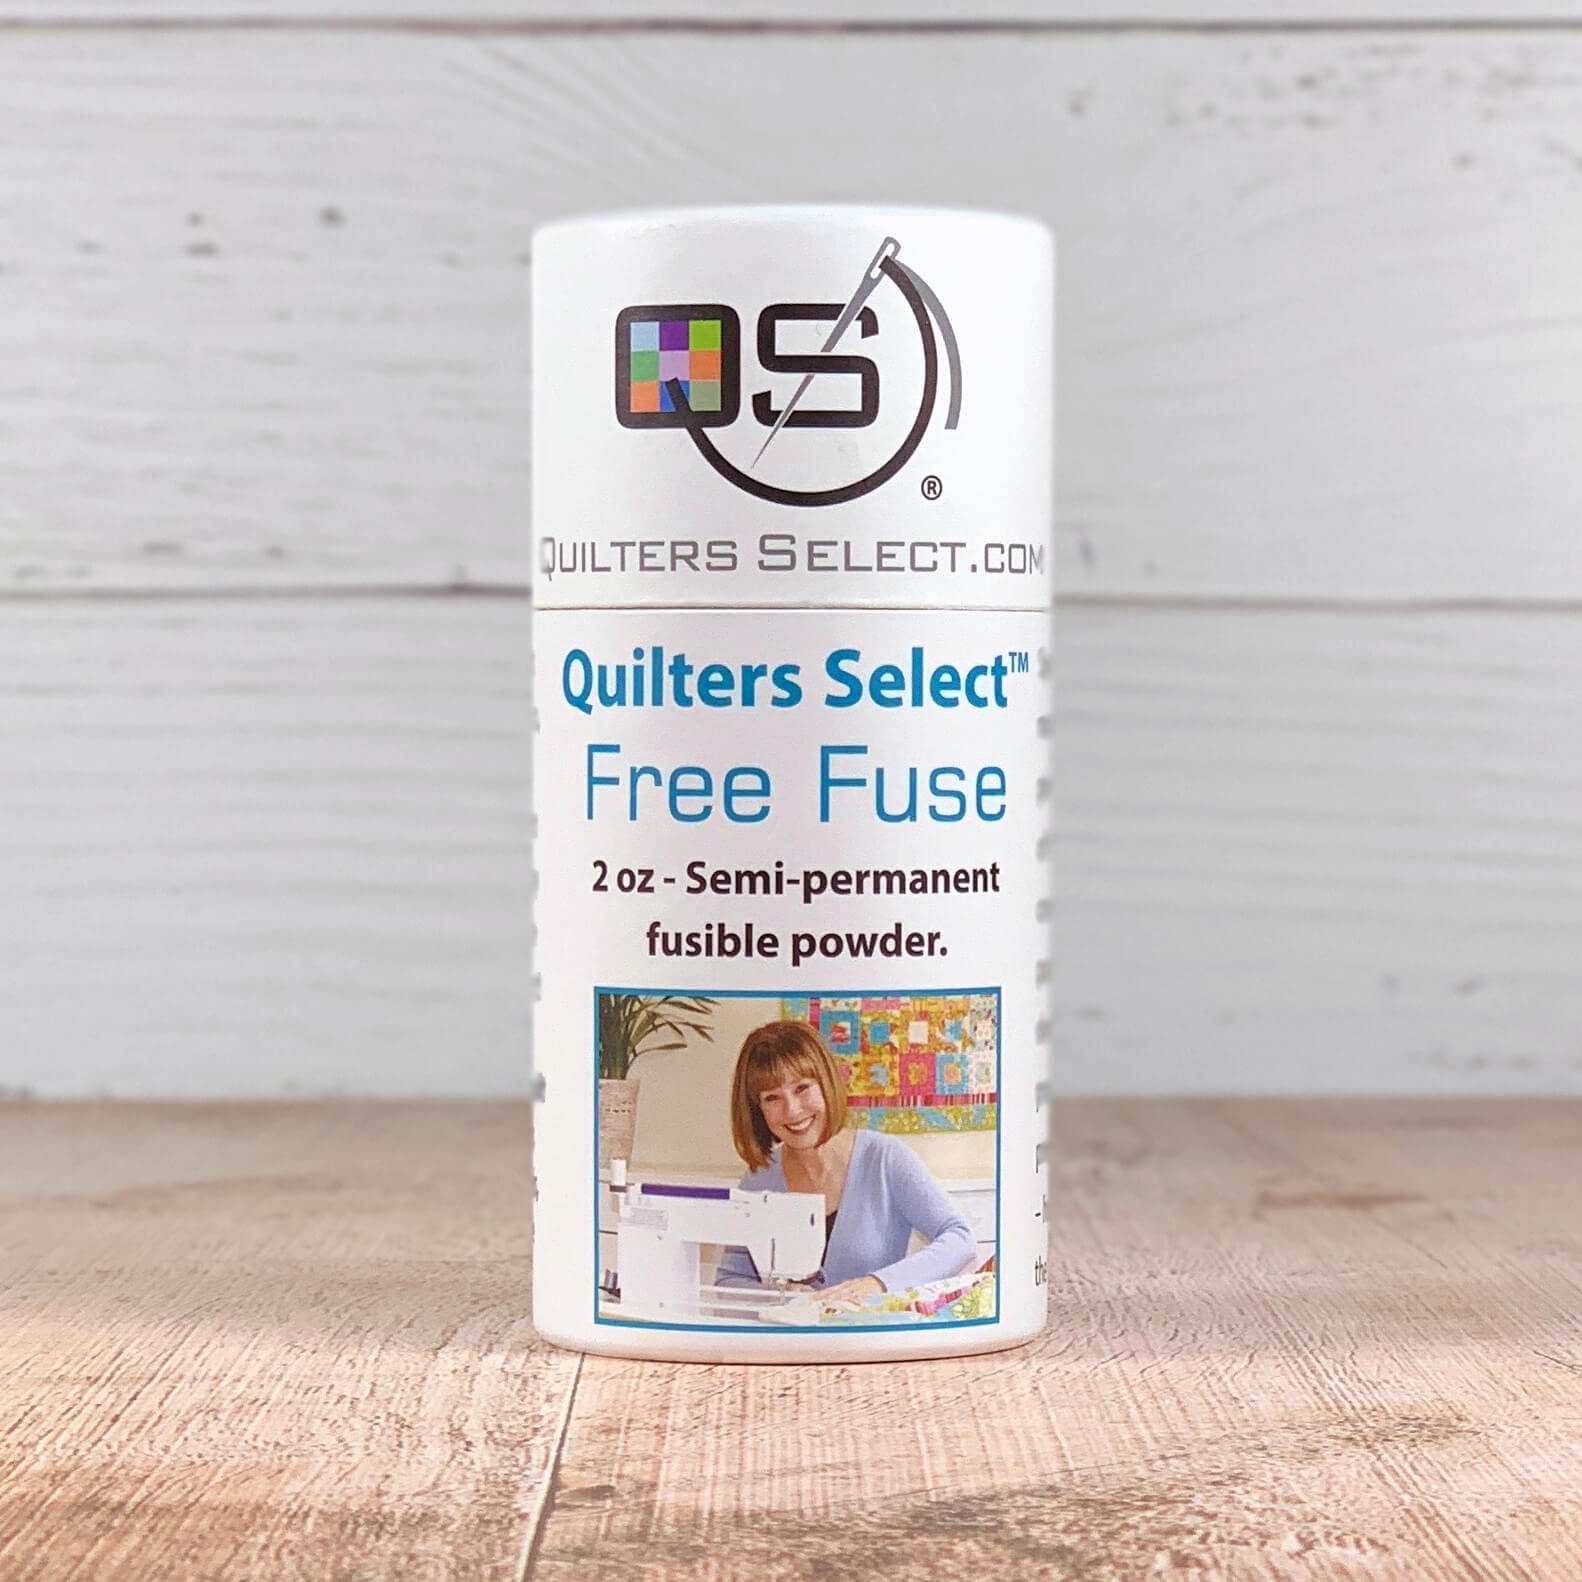 Quilters Select Free Fuse - simple and mess free fabric fuse